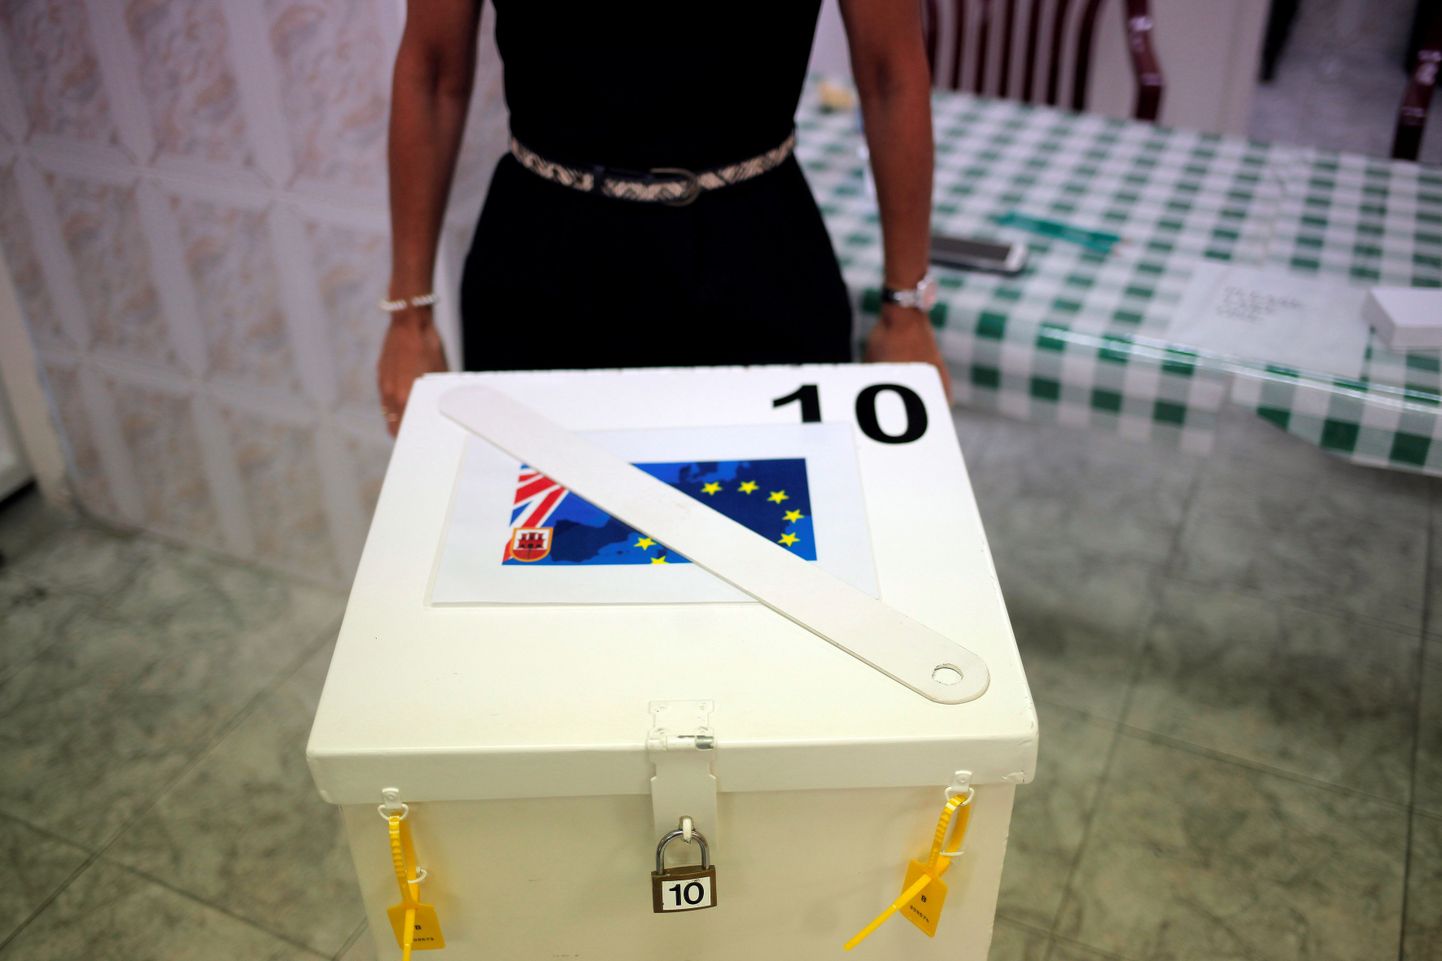 A member of a polling station stands next to a polling box as she waits for citizens during the EU referendum in the British overseas territory of Gibraltar, historically claimed by Spain, June 23, 2016. REUTERS/Jon Nazca